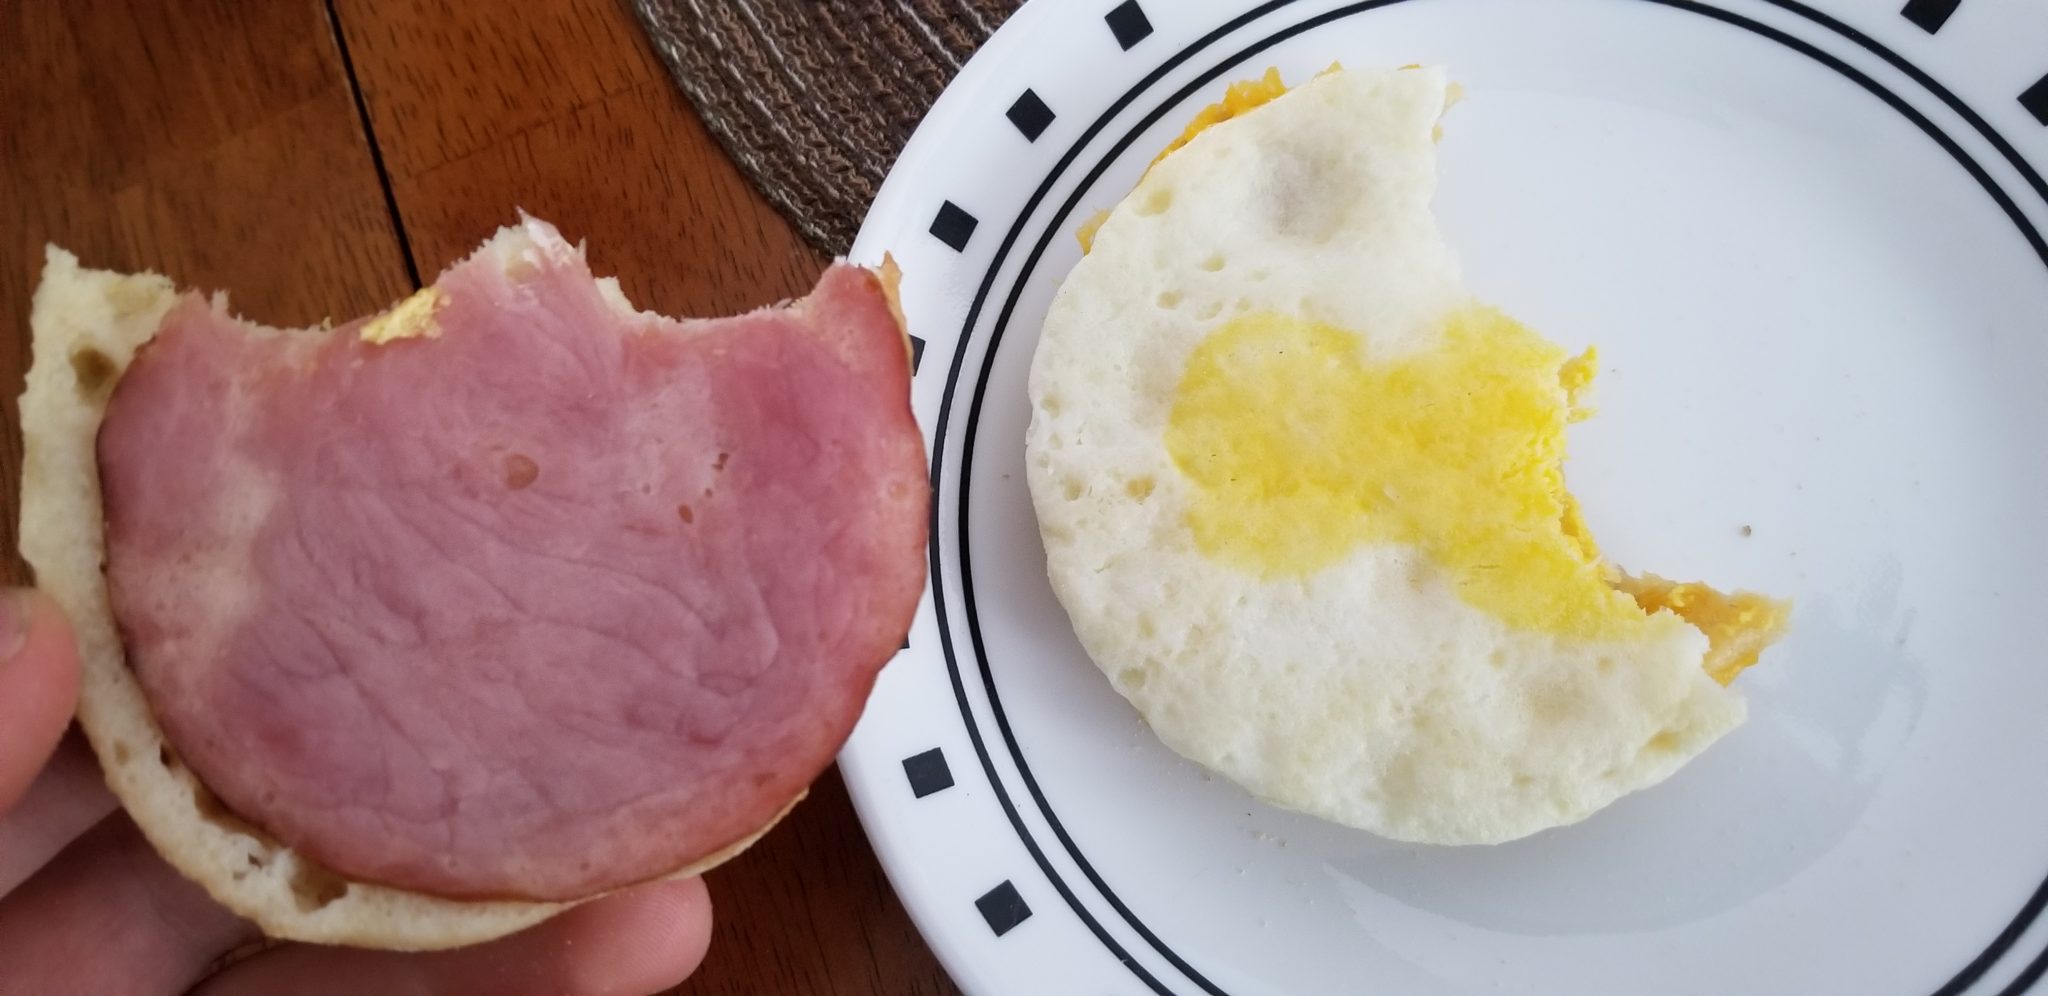 Jimmy Dean English Muffin, Canadian Bacon, Whole Egg and Cheese inside the sandwich.